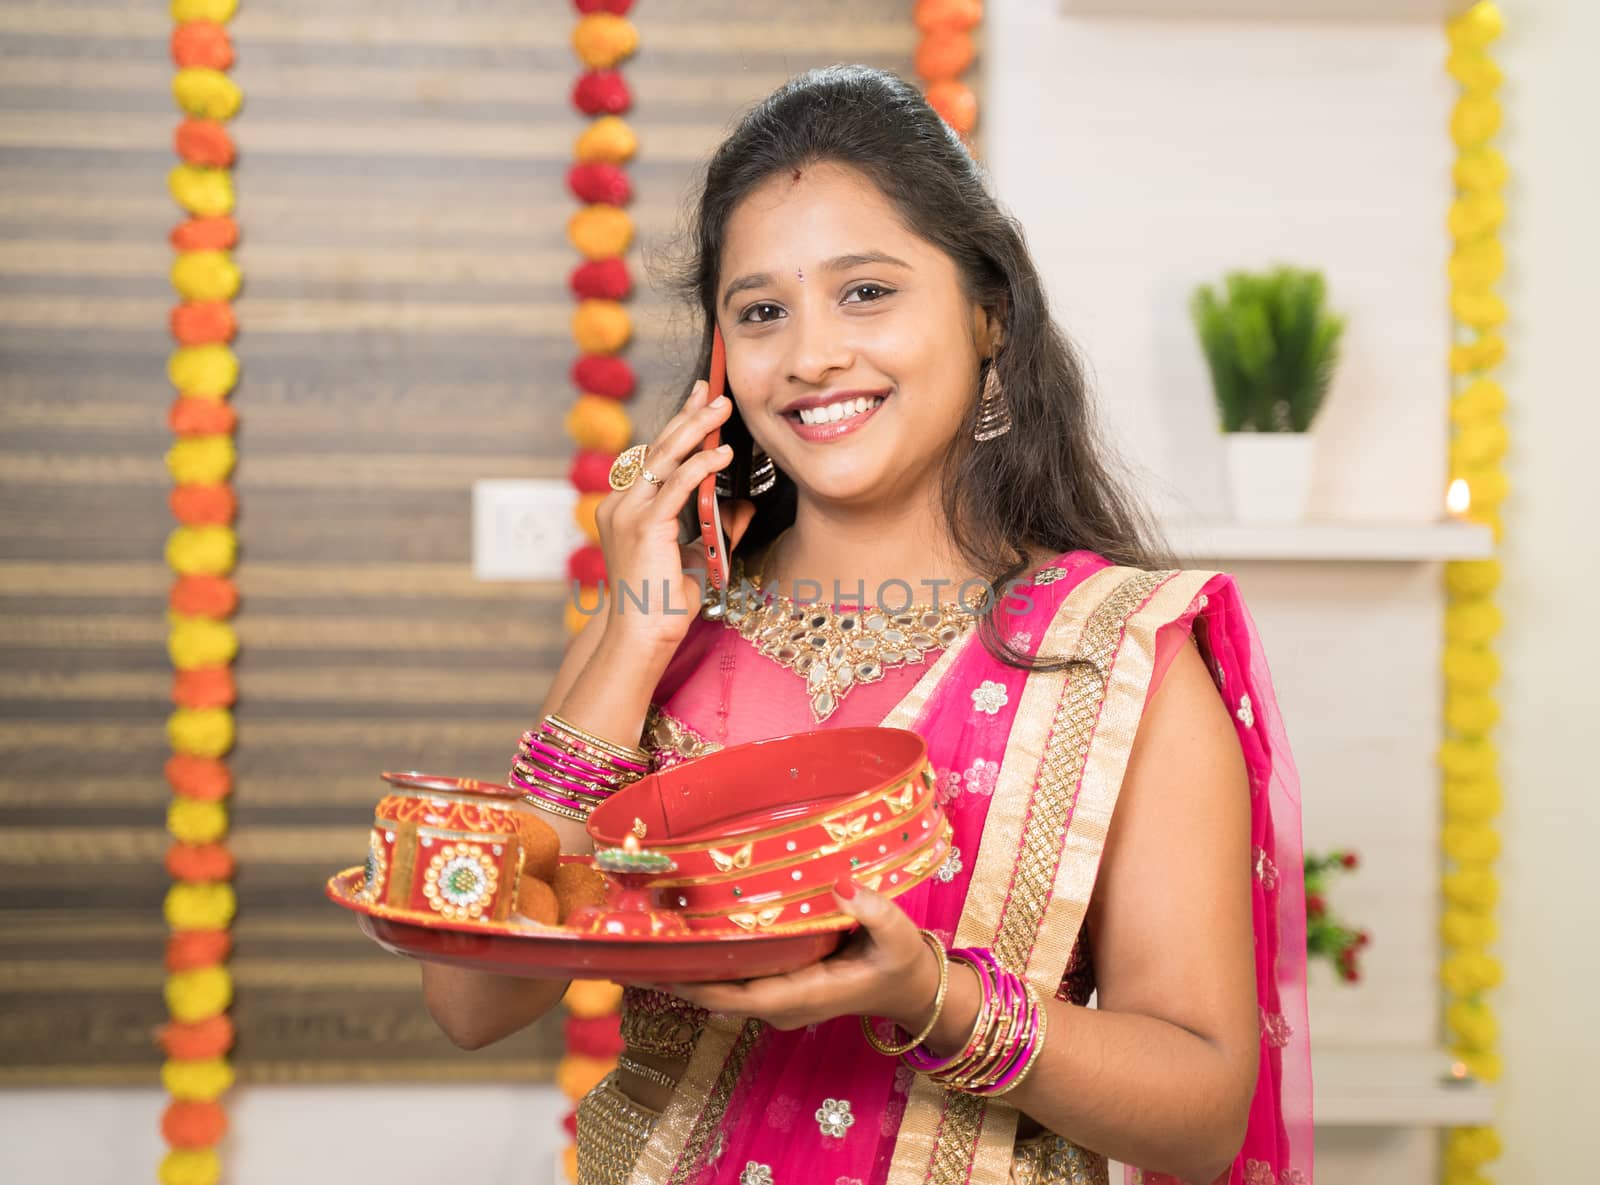 Smiling Indian Woman in traditional dress holding Karva Chauth Thali or plate while busy in talking on mobile